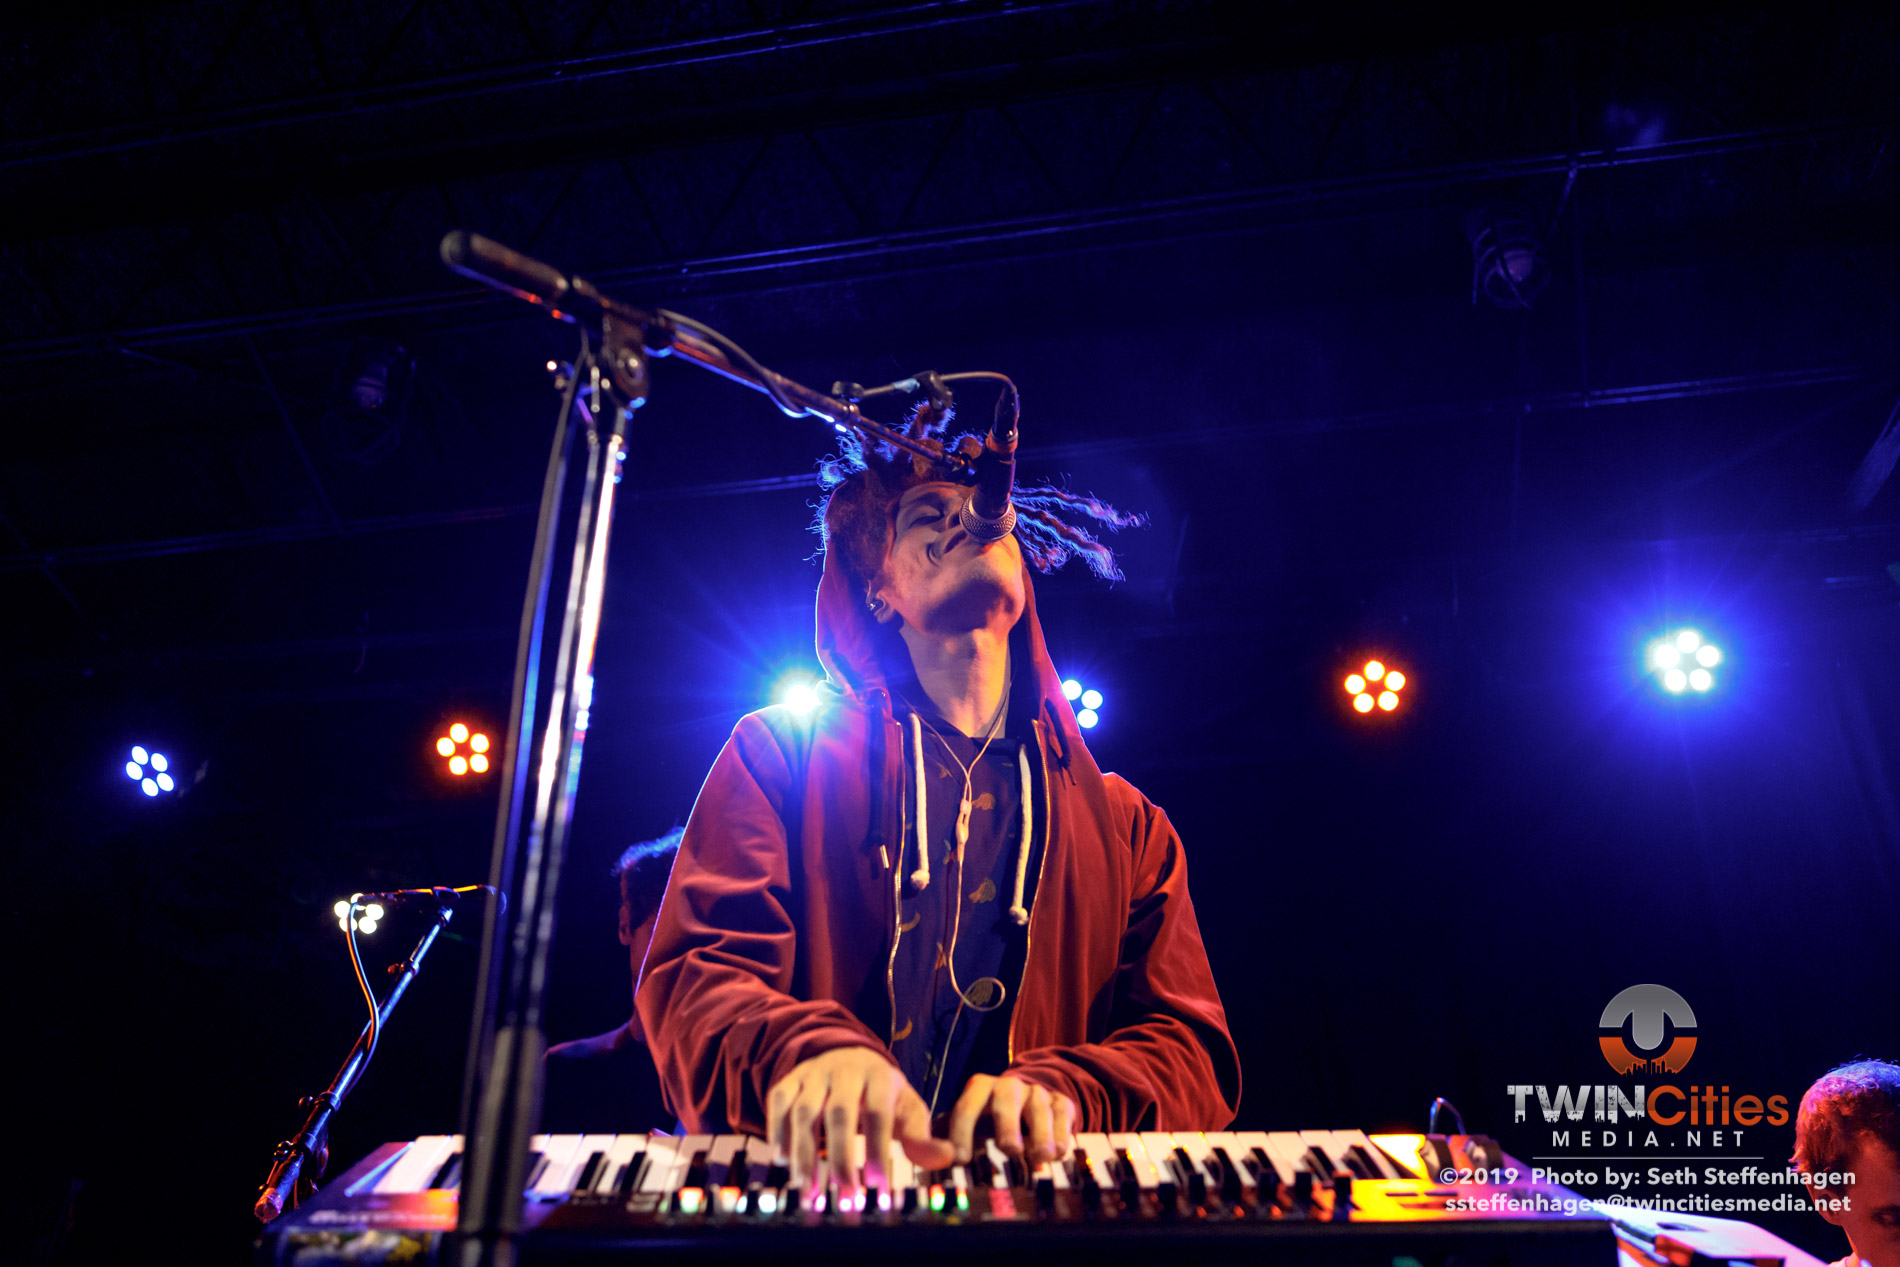 October 2, 2019 - Minneapolis, Minnesota, United States -  altopalo  live in concert at 7th Street Entry  opening for Cosmo Sheldrake.

(Photo by Seth Steffenhagen/Steffenhagen Photography)